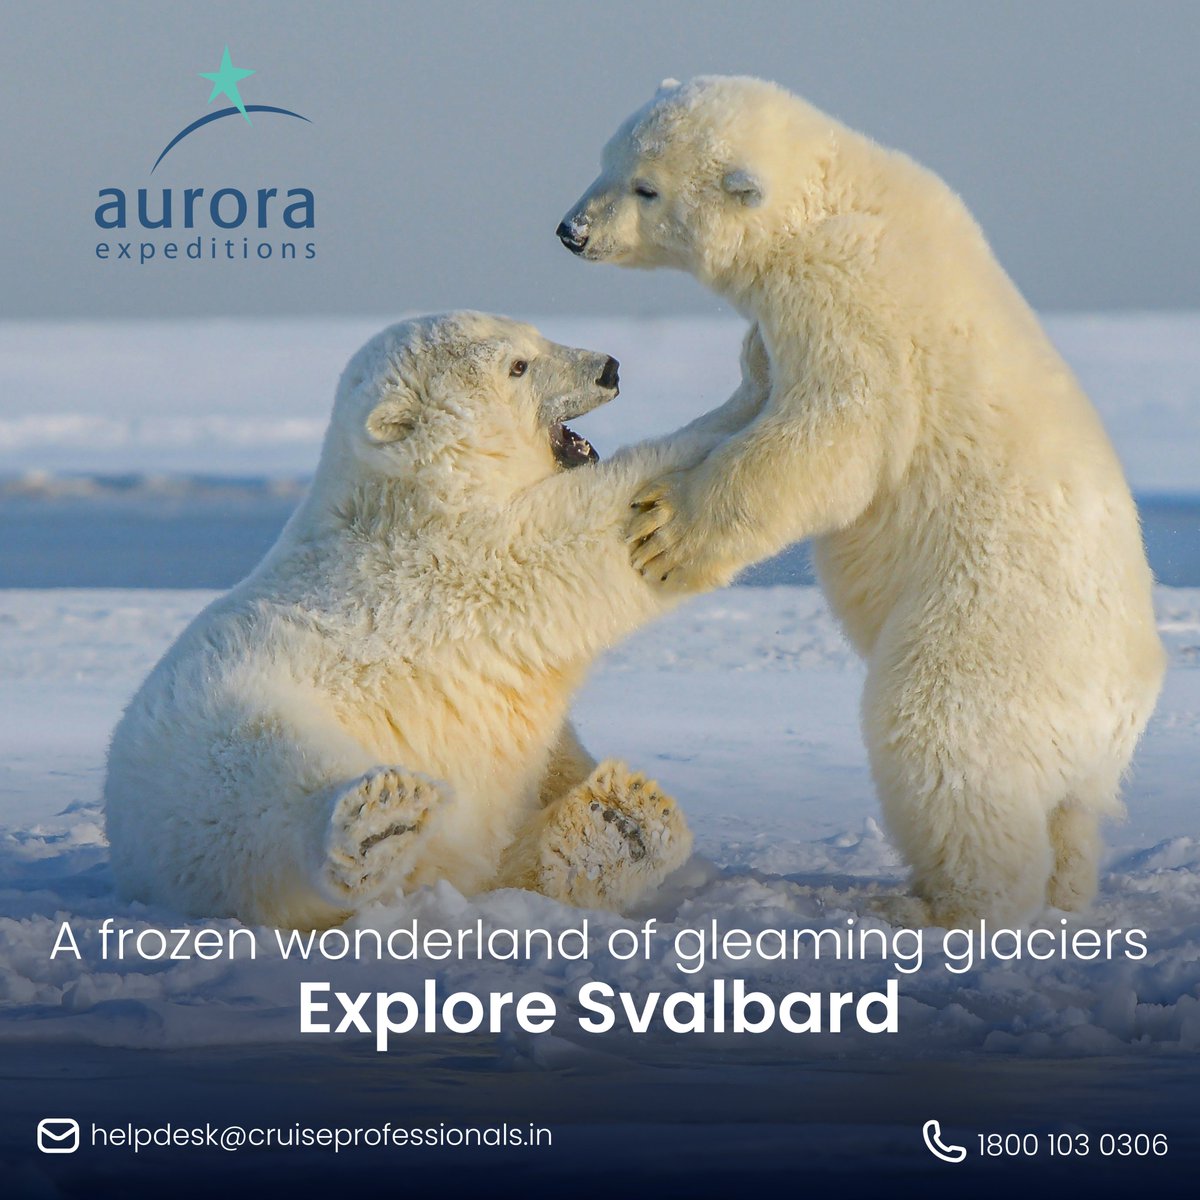 Explore the Realm of Polar Bear on an expedition cruise to Svalbard with Aurora Expeditions.

#auroraexpeditions #cruiseprofessionals #cruiseaddict #cruisetravel #traveller #exploring #expeditioncruise #arctic #svalbard #cruiseholiday